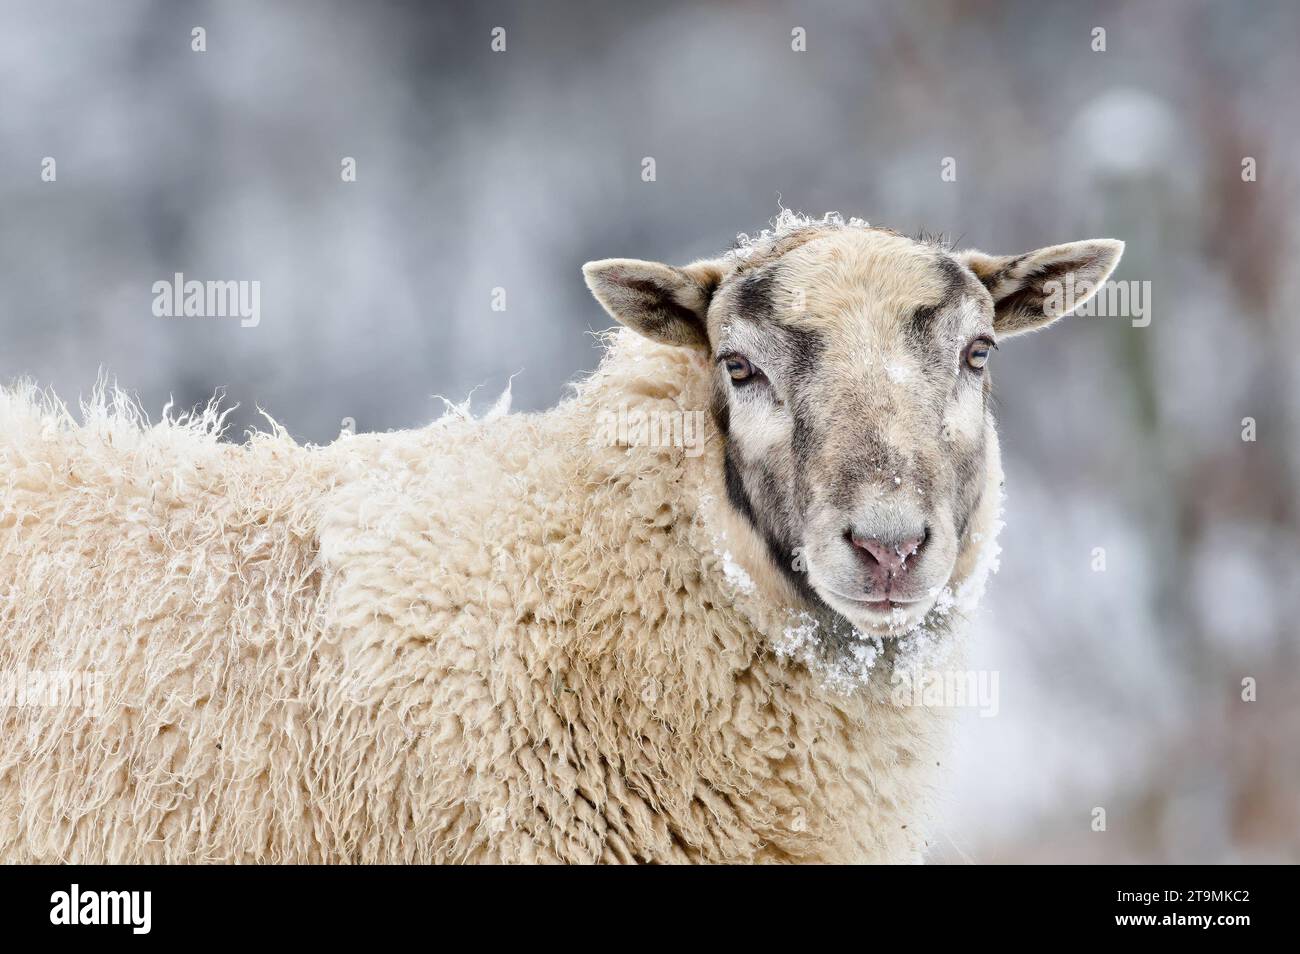 Domestic sheep close-up portrait on the winter pasture covered by snow. Livestock on small farm in Czech republic countryside. Stock Photo